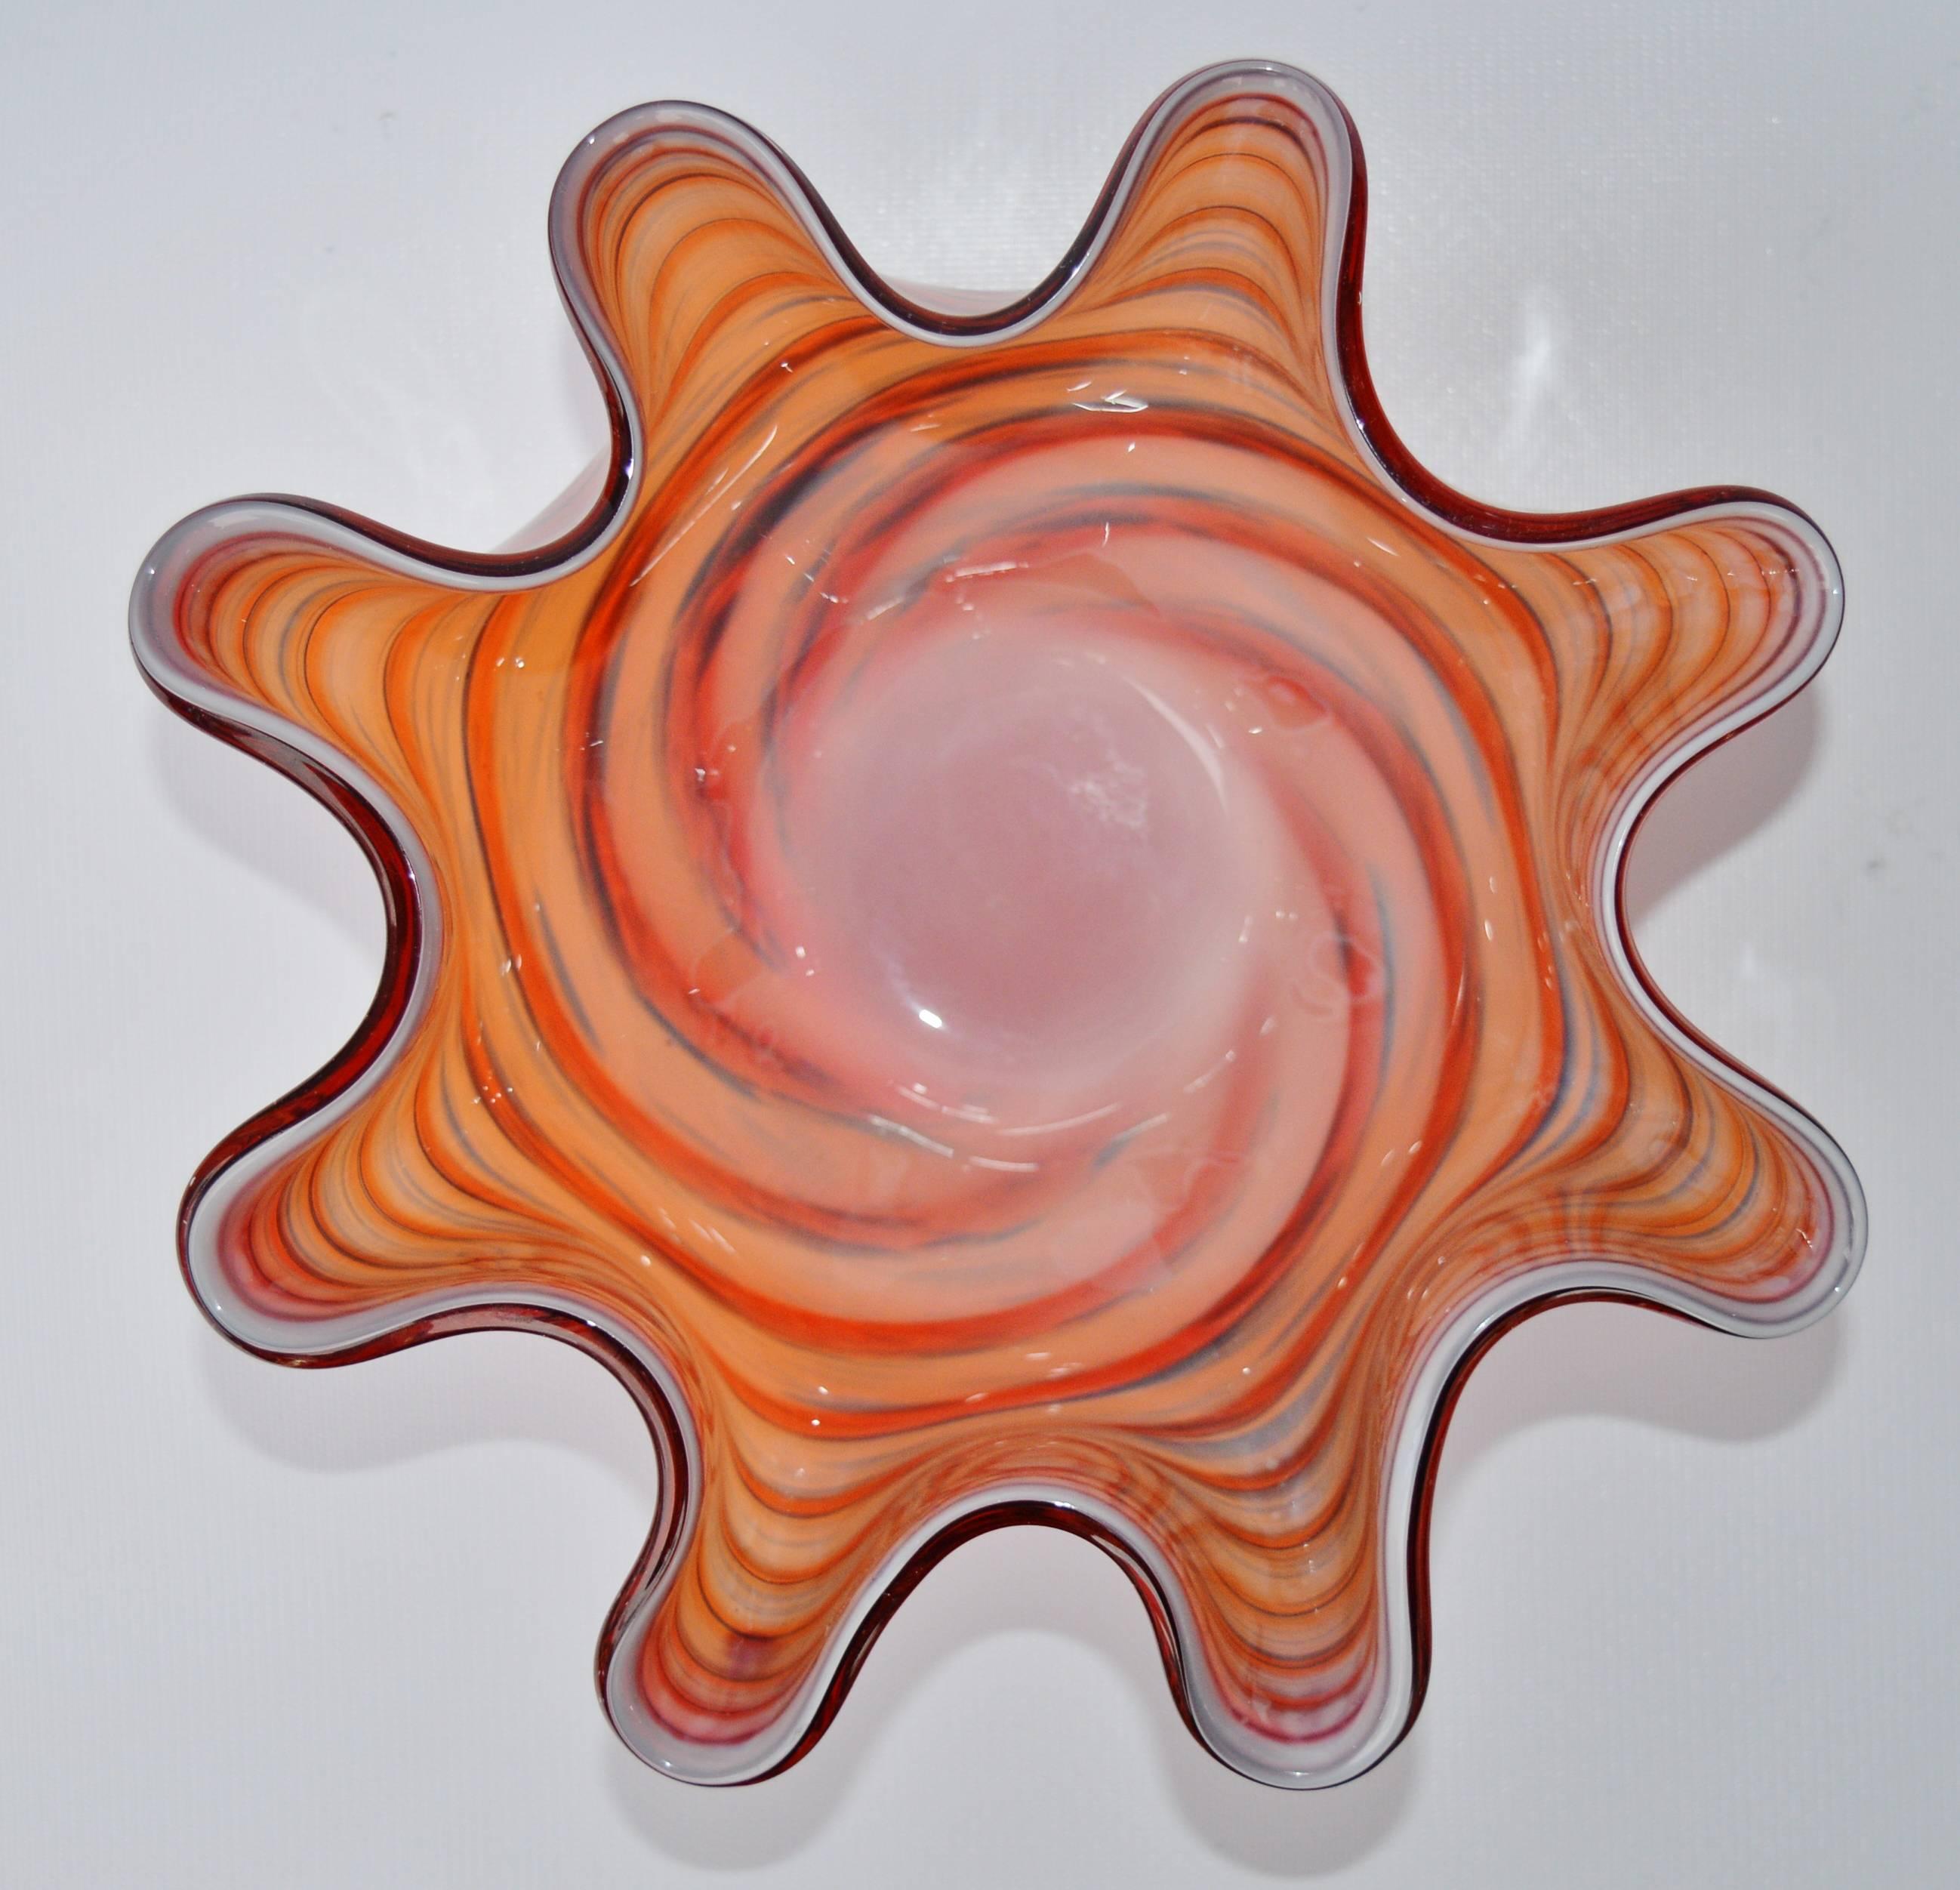 This stunning Murano blown glass handkerchief bowl has the loveliest shades of red, orange and blue with subtle striations and a darker toned that are very unique and dramatic. In excellent vintage condition with no chips or major scratches or